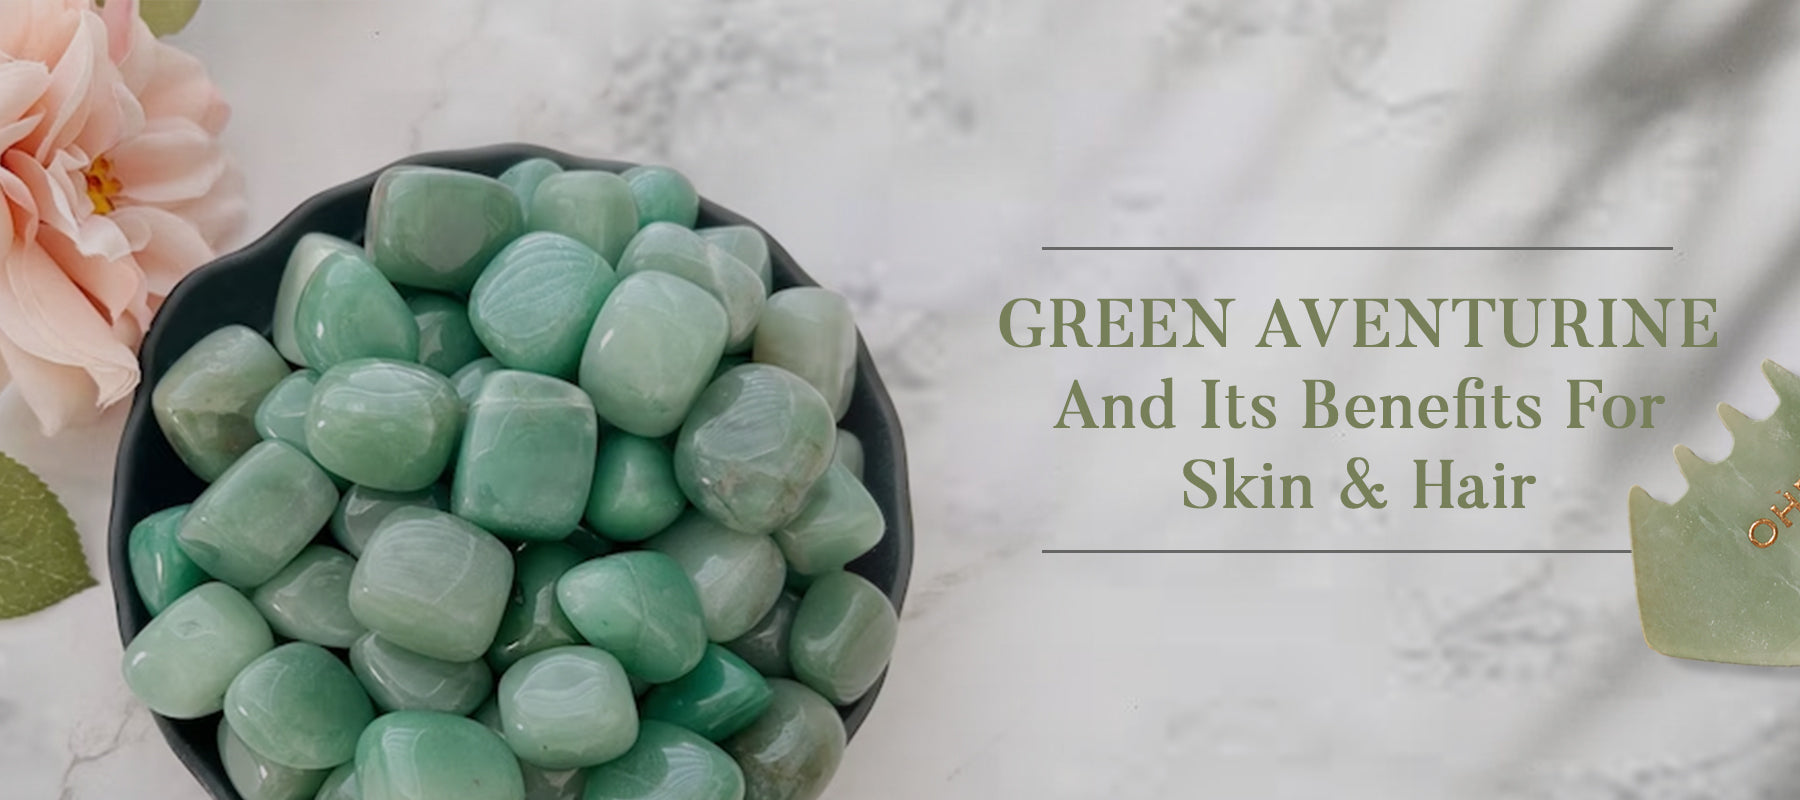 Green Aventurine And Its Benefits For Skin - Ohria Ayurveda